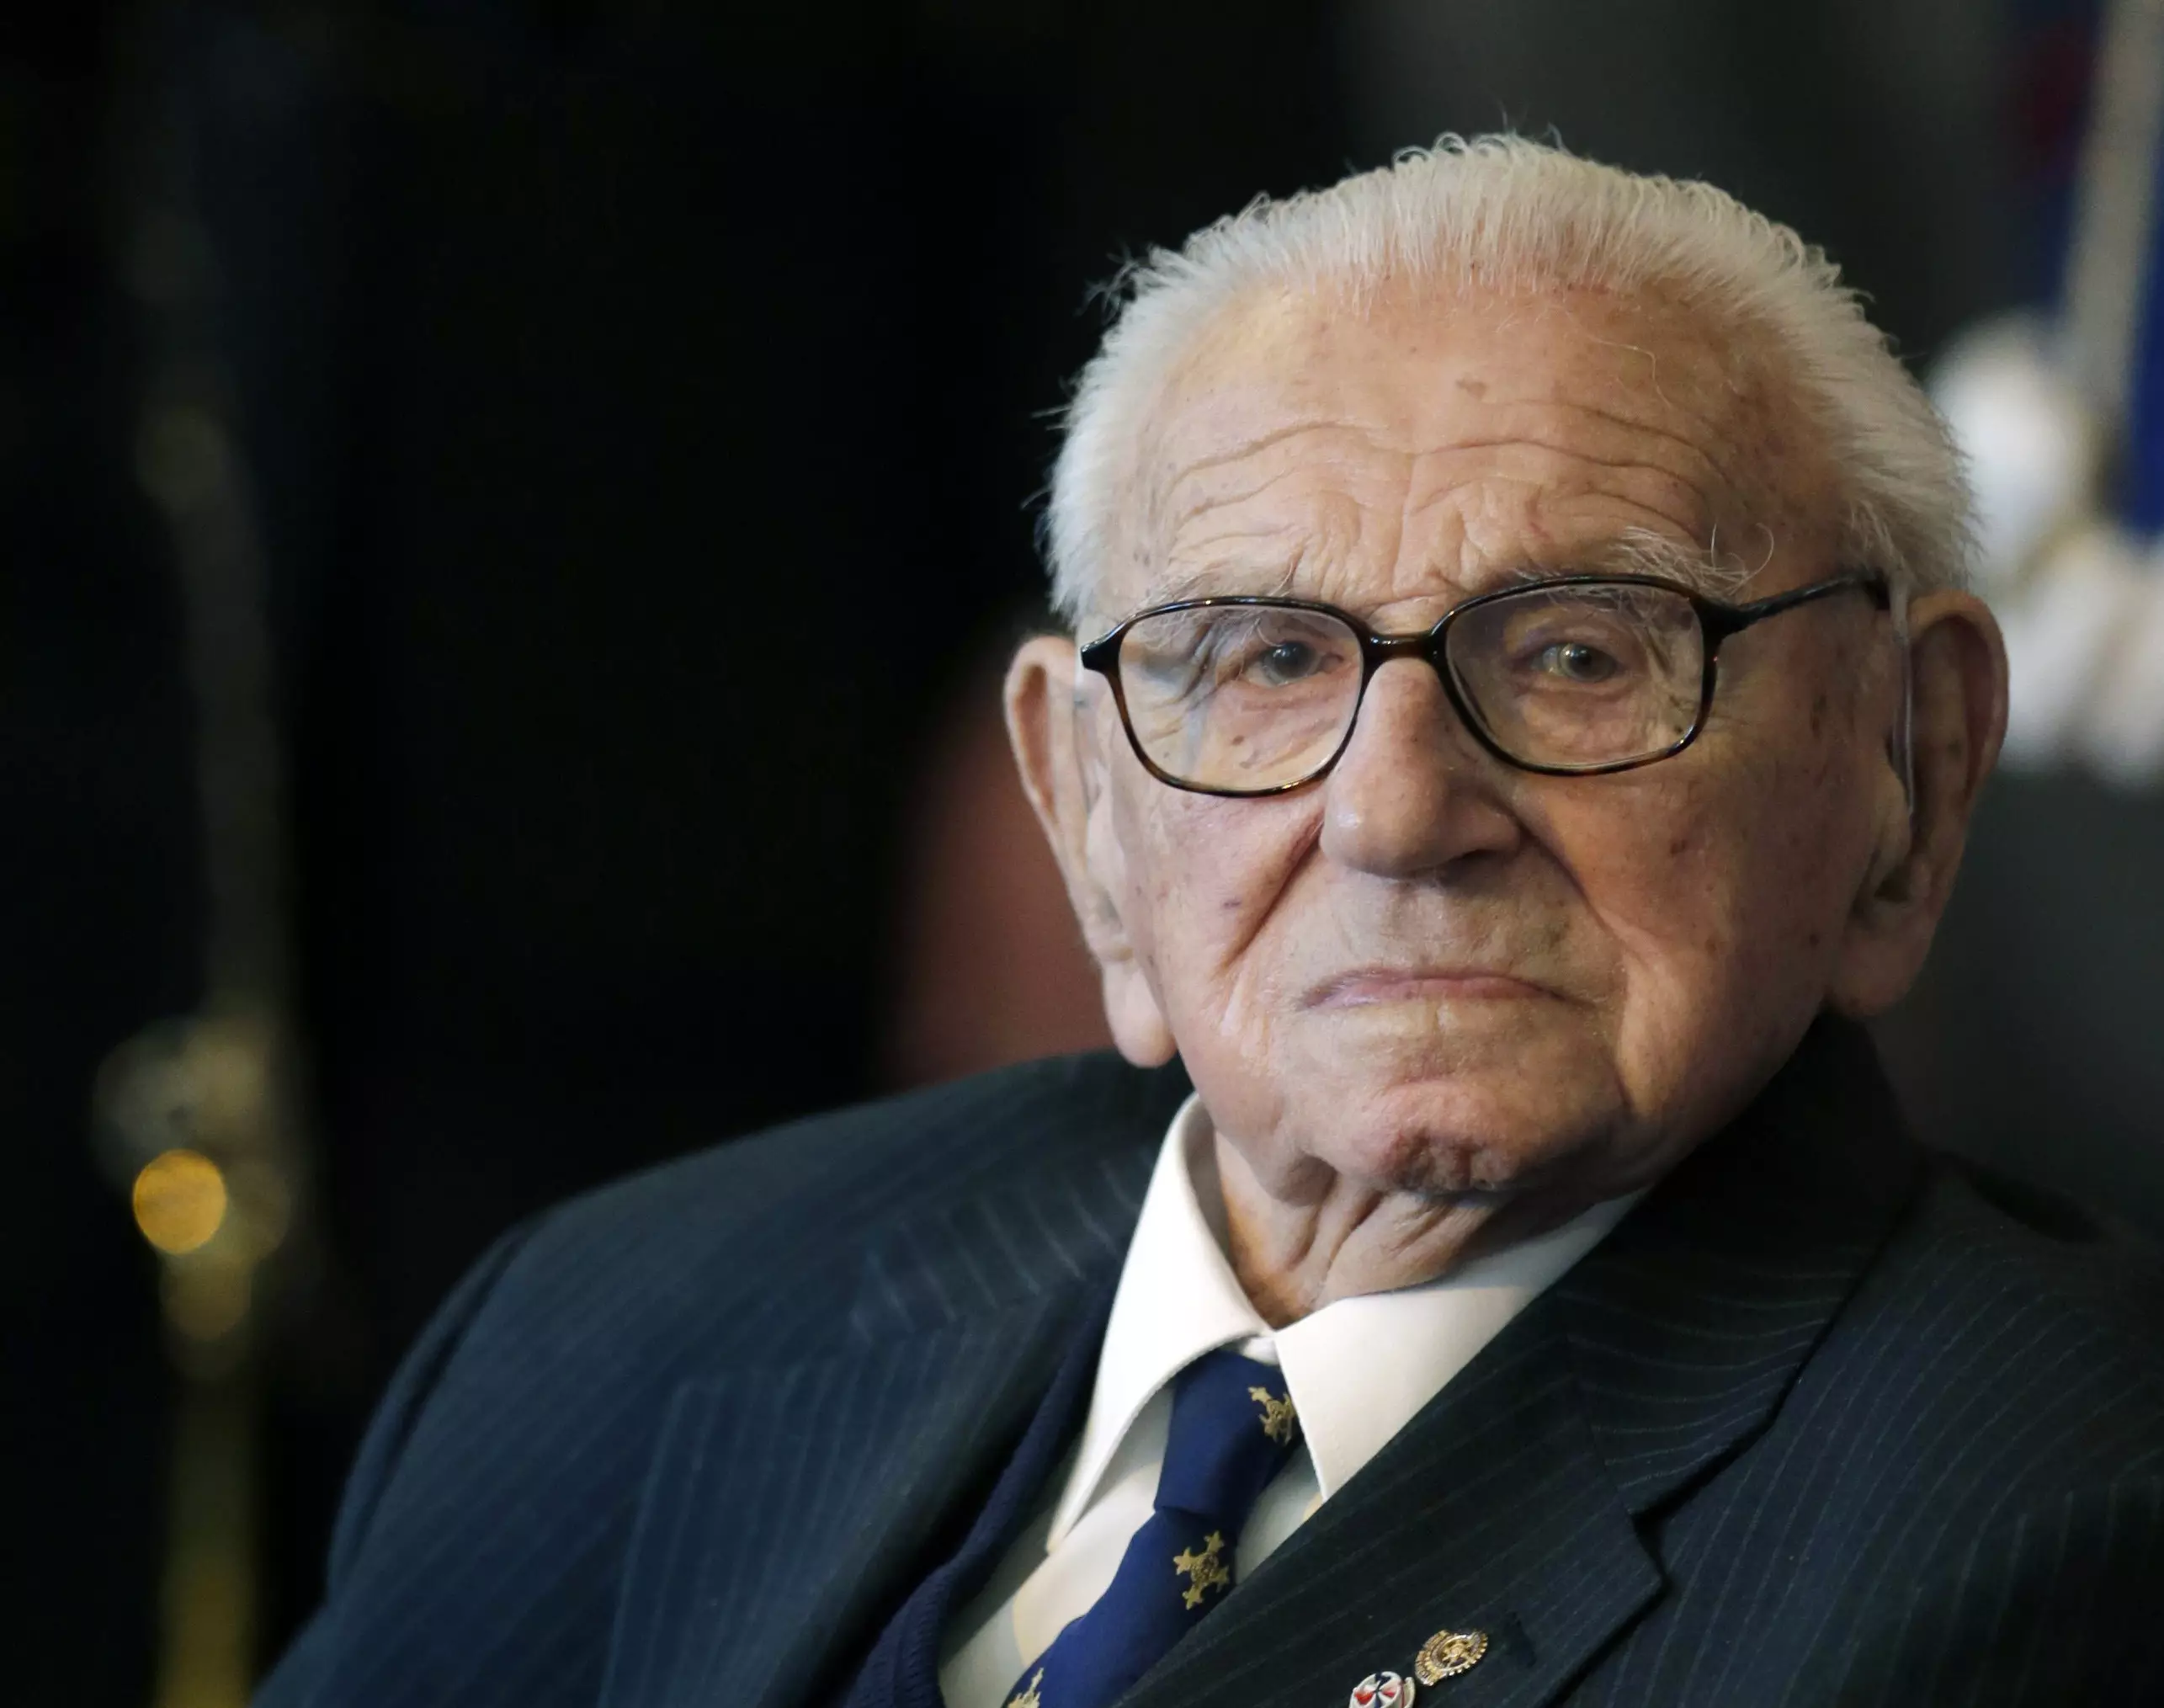 Meet The Man Who Saved Thousands Of People From The Nazis